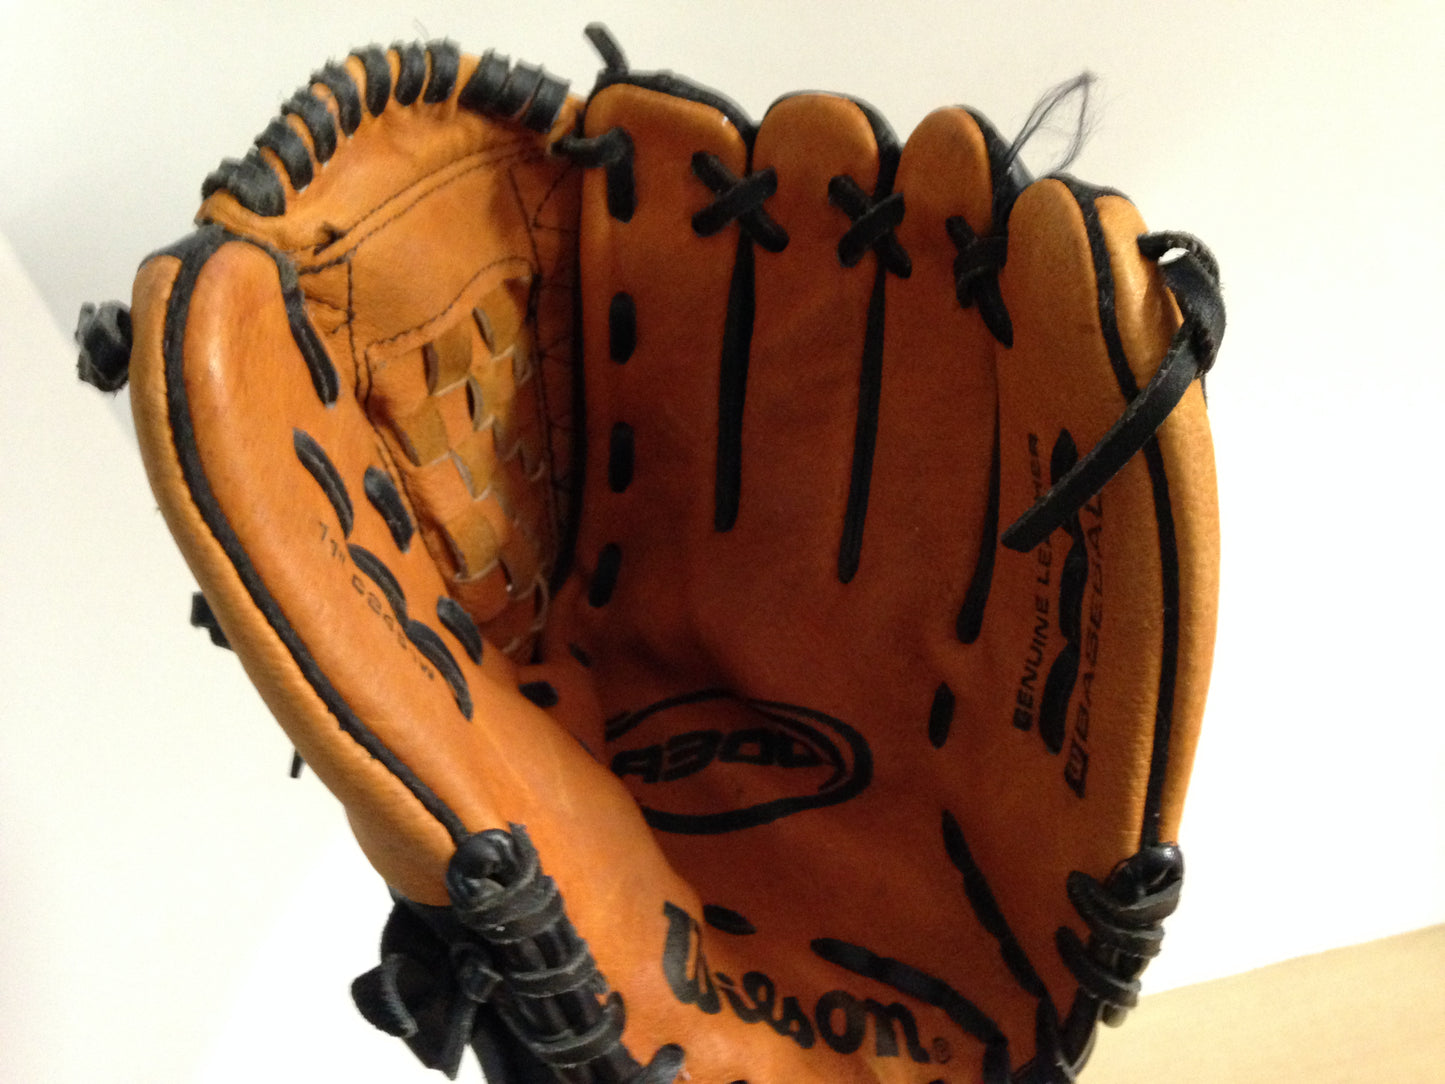 Baseball Glove Adult Size 11 inch Wilson C245 Leather Black Brown Fits on Left Hand Excellent